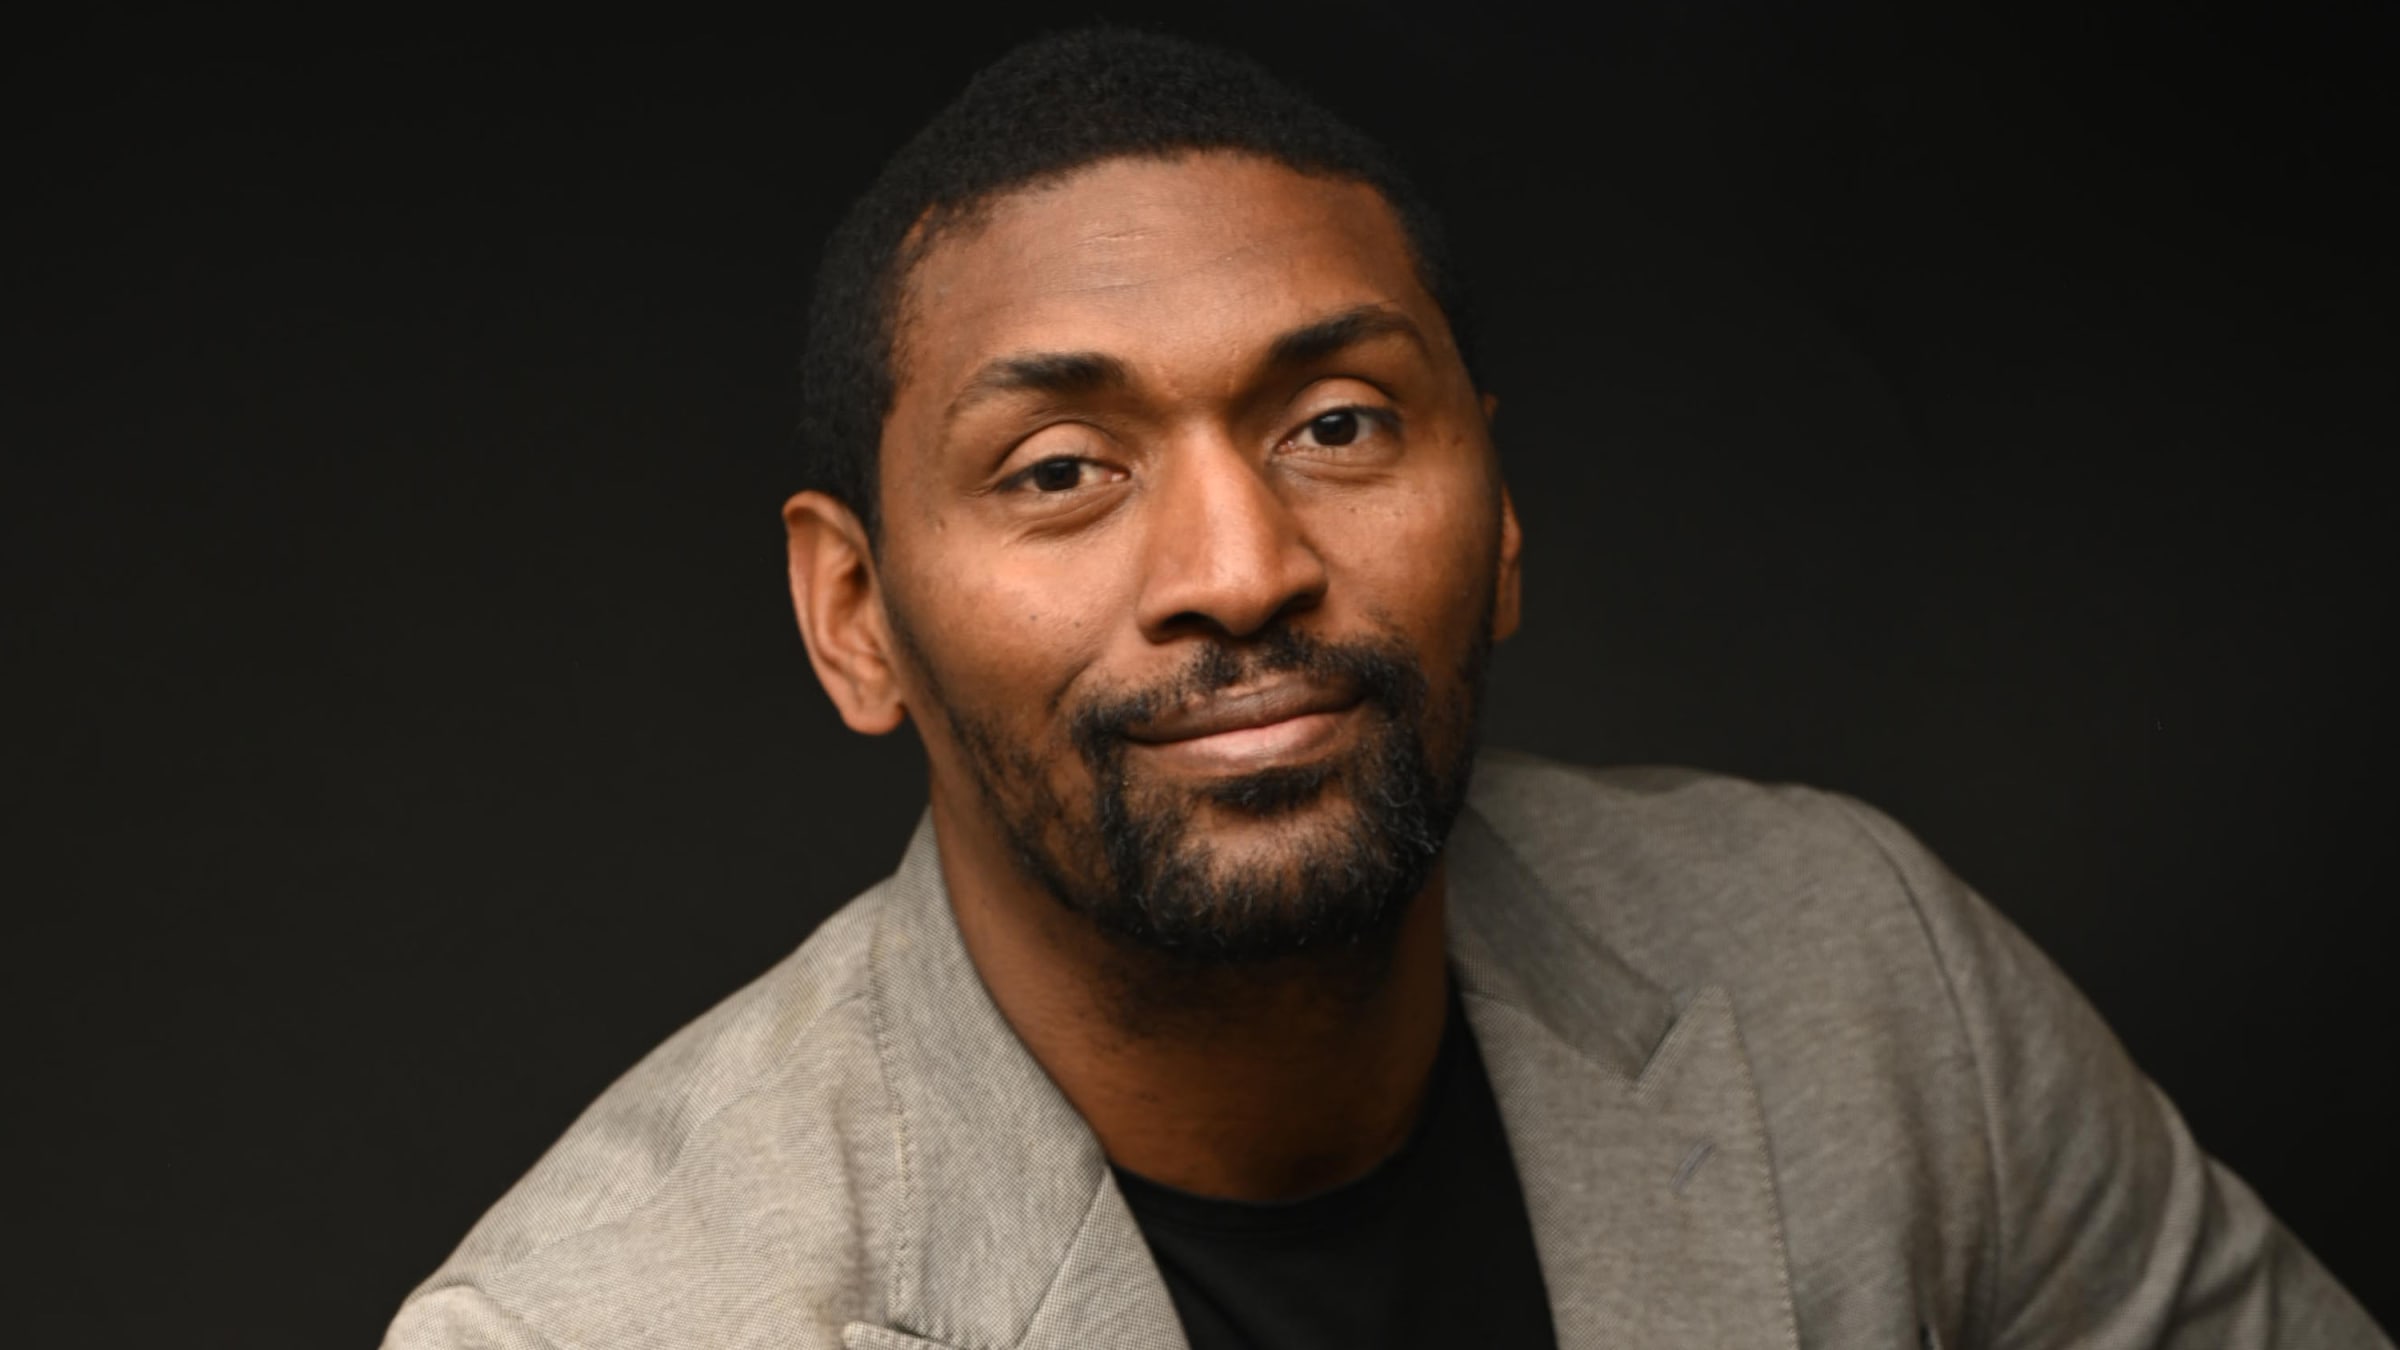 Lakers Star Ron Artest Makes it a Real Season of Giving